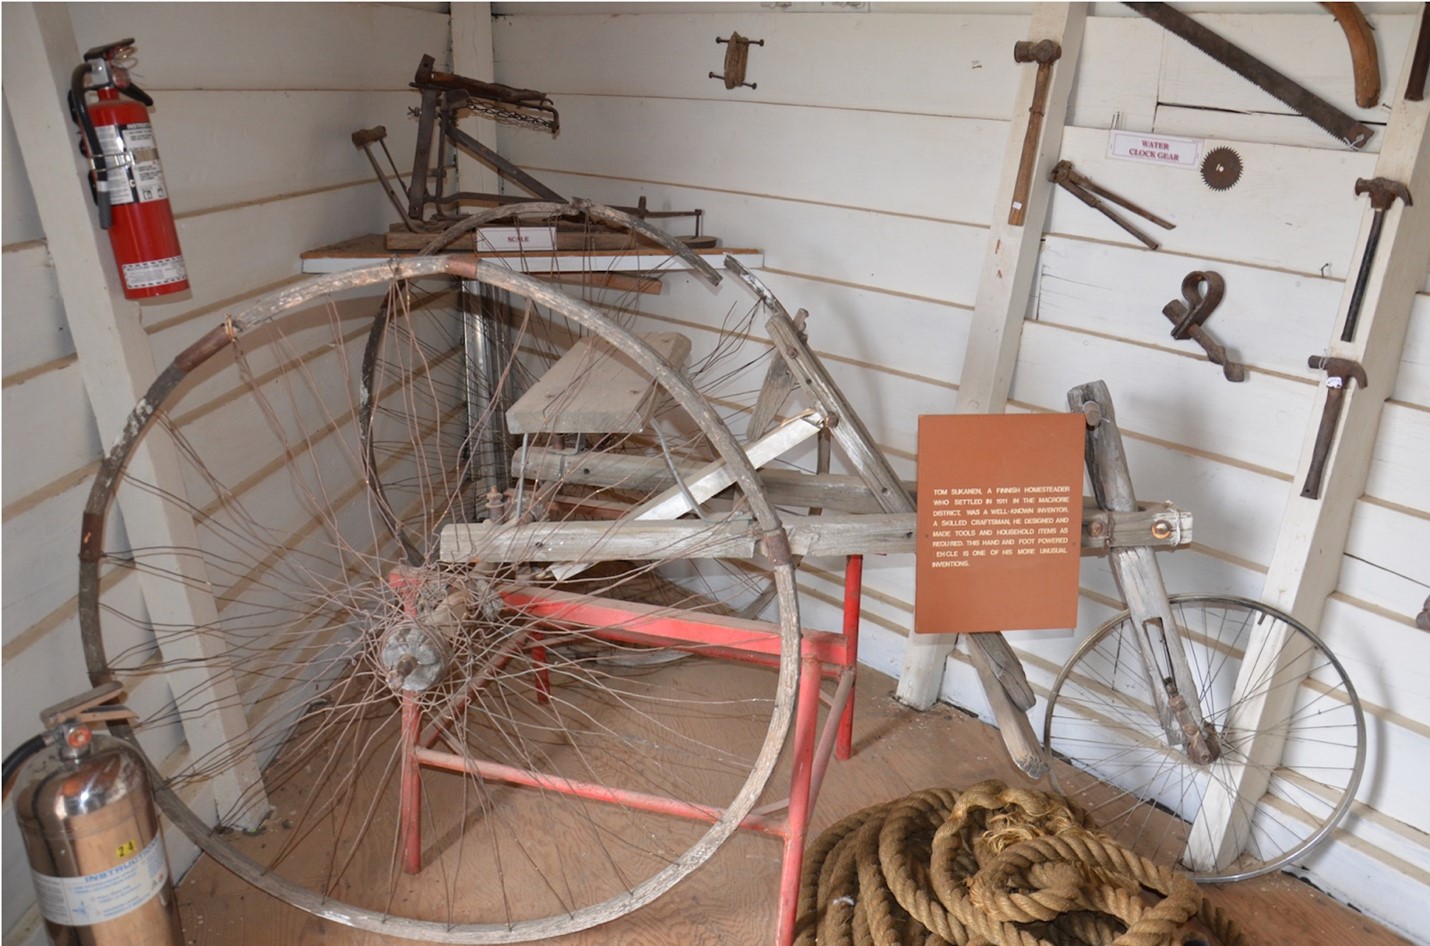 Pictured is a photo of a large tricycle, made by Tom Sukanen, being displayed in a corner of the Sukanen Ship Pioneer Village and Museum. The wall behind the tricycle is white shiplap and there are other assorted tools hanging from the wall. There is an orange sign attached to the tricycle which is illegible from the distance the photo was taken, presumably giving details about the item.